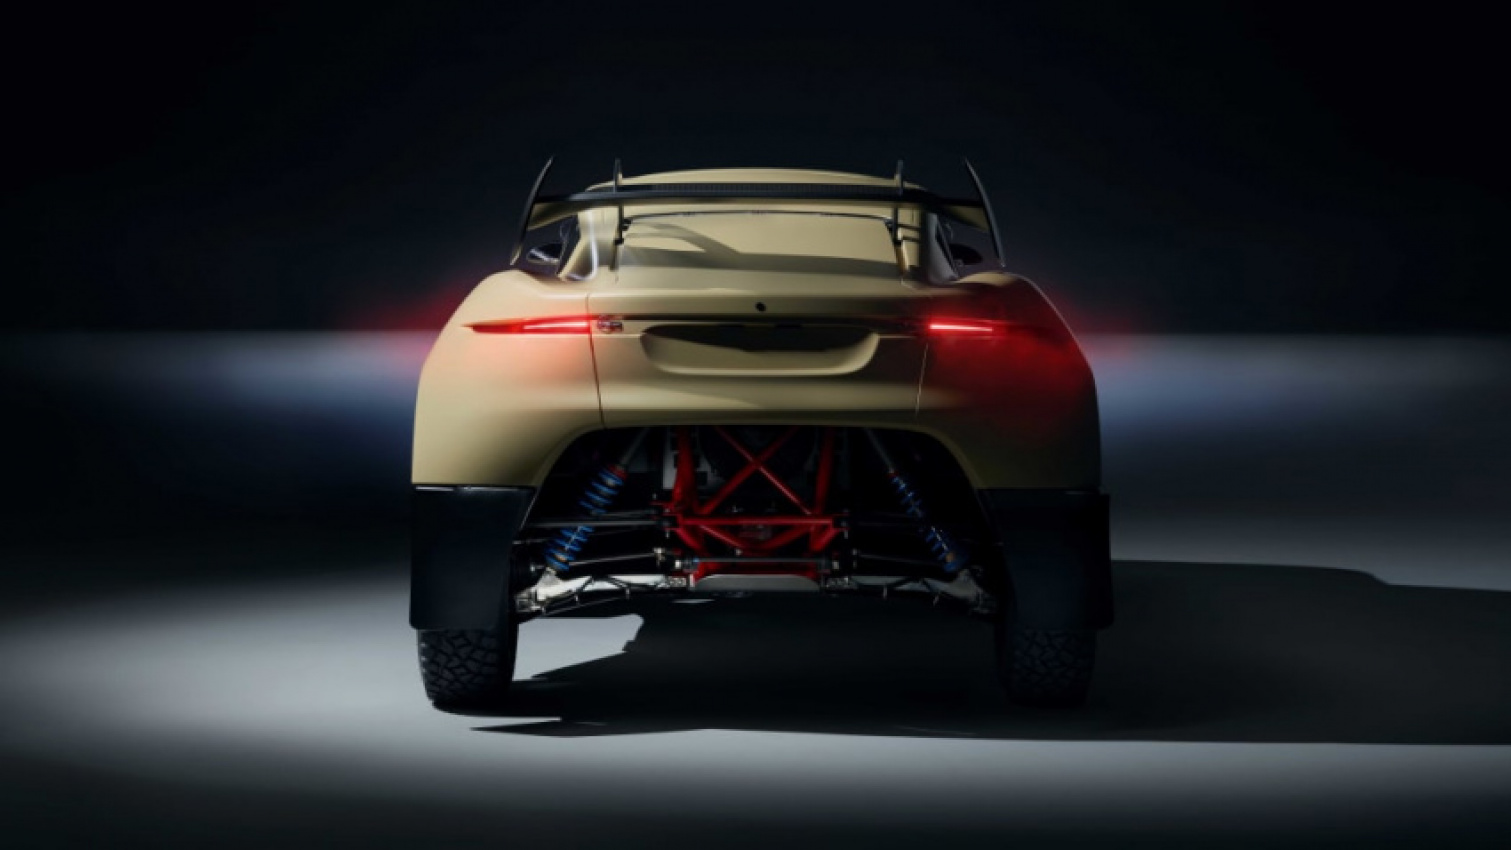 acer, aftermarket, autos, cars, aftermarket, off-road vehicles, performance, supercars, the prodrive hunter is an extreme off-road racer for the street